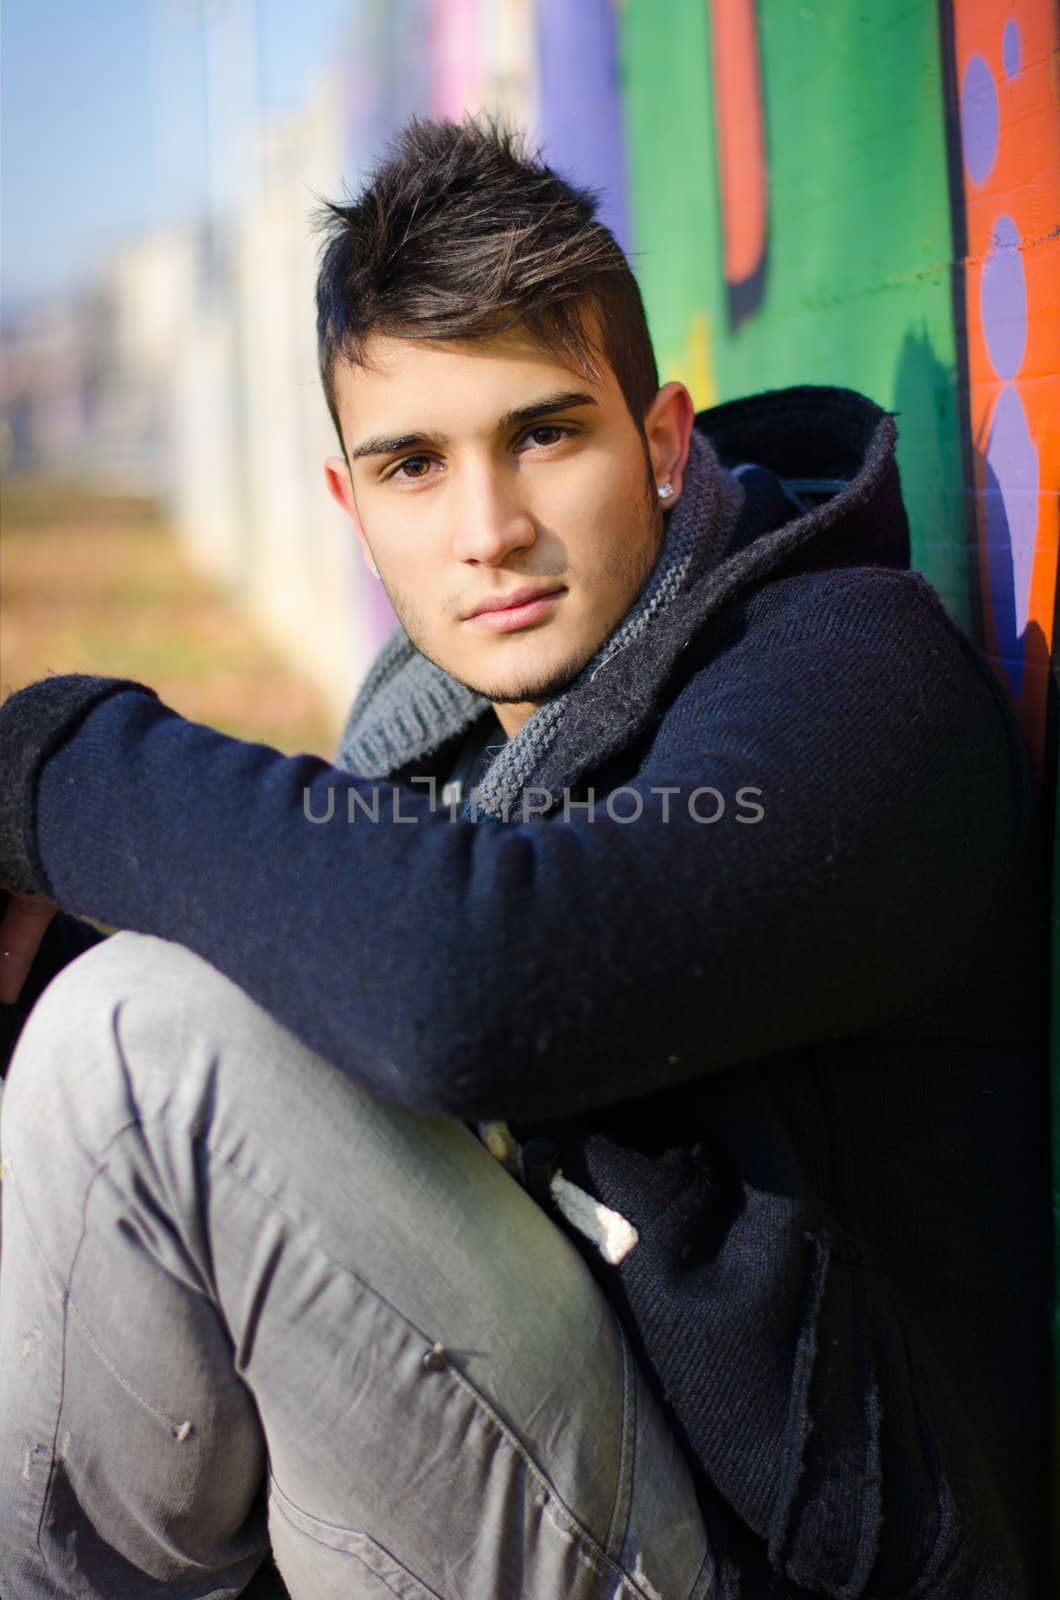 Handsome young man sitting against colorful graffiti by artofphoto